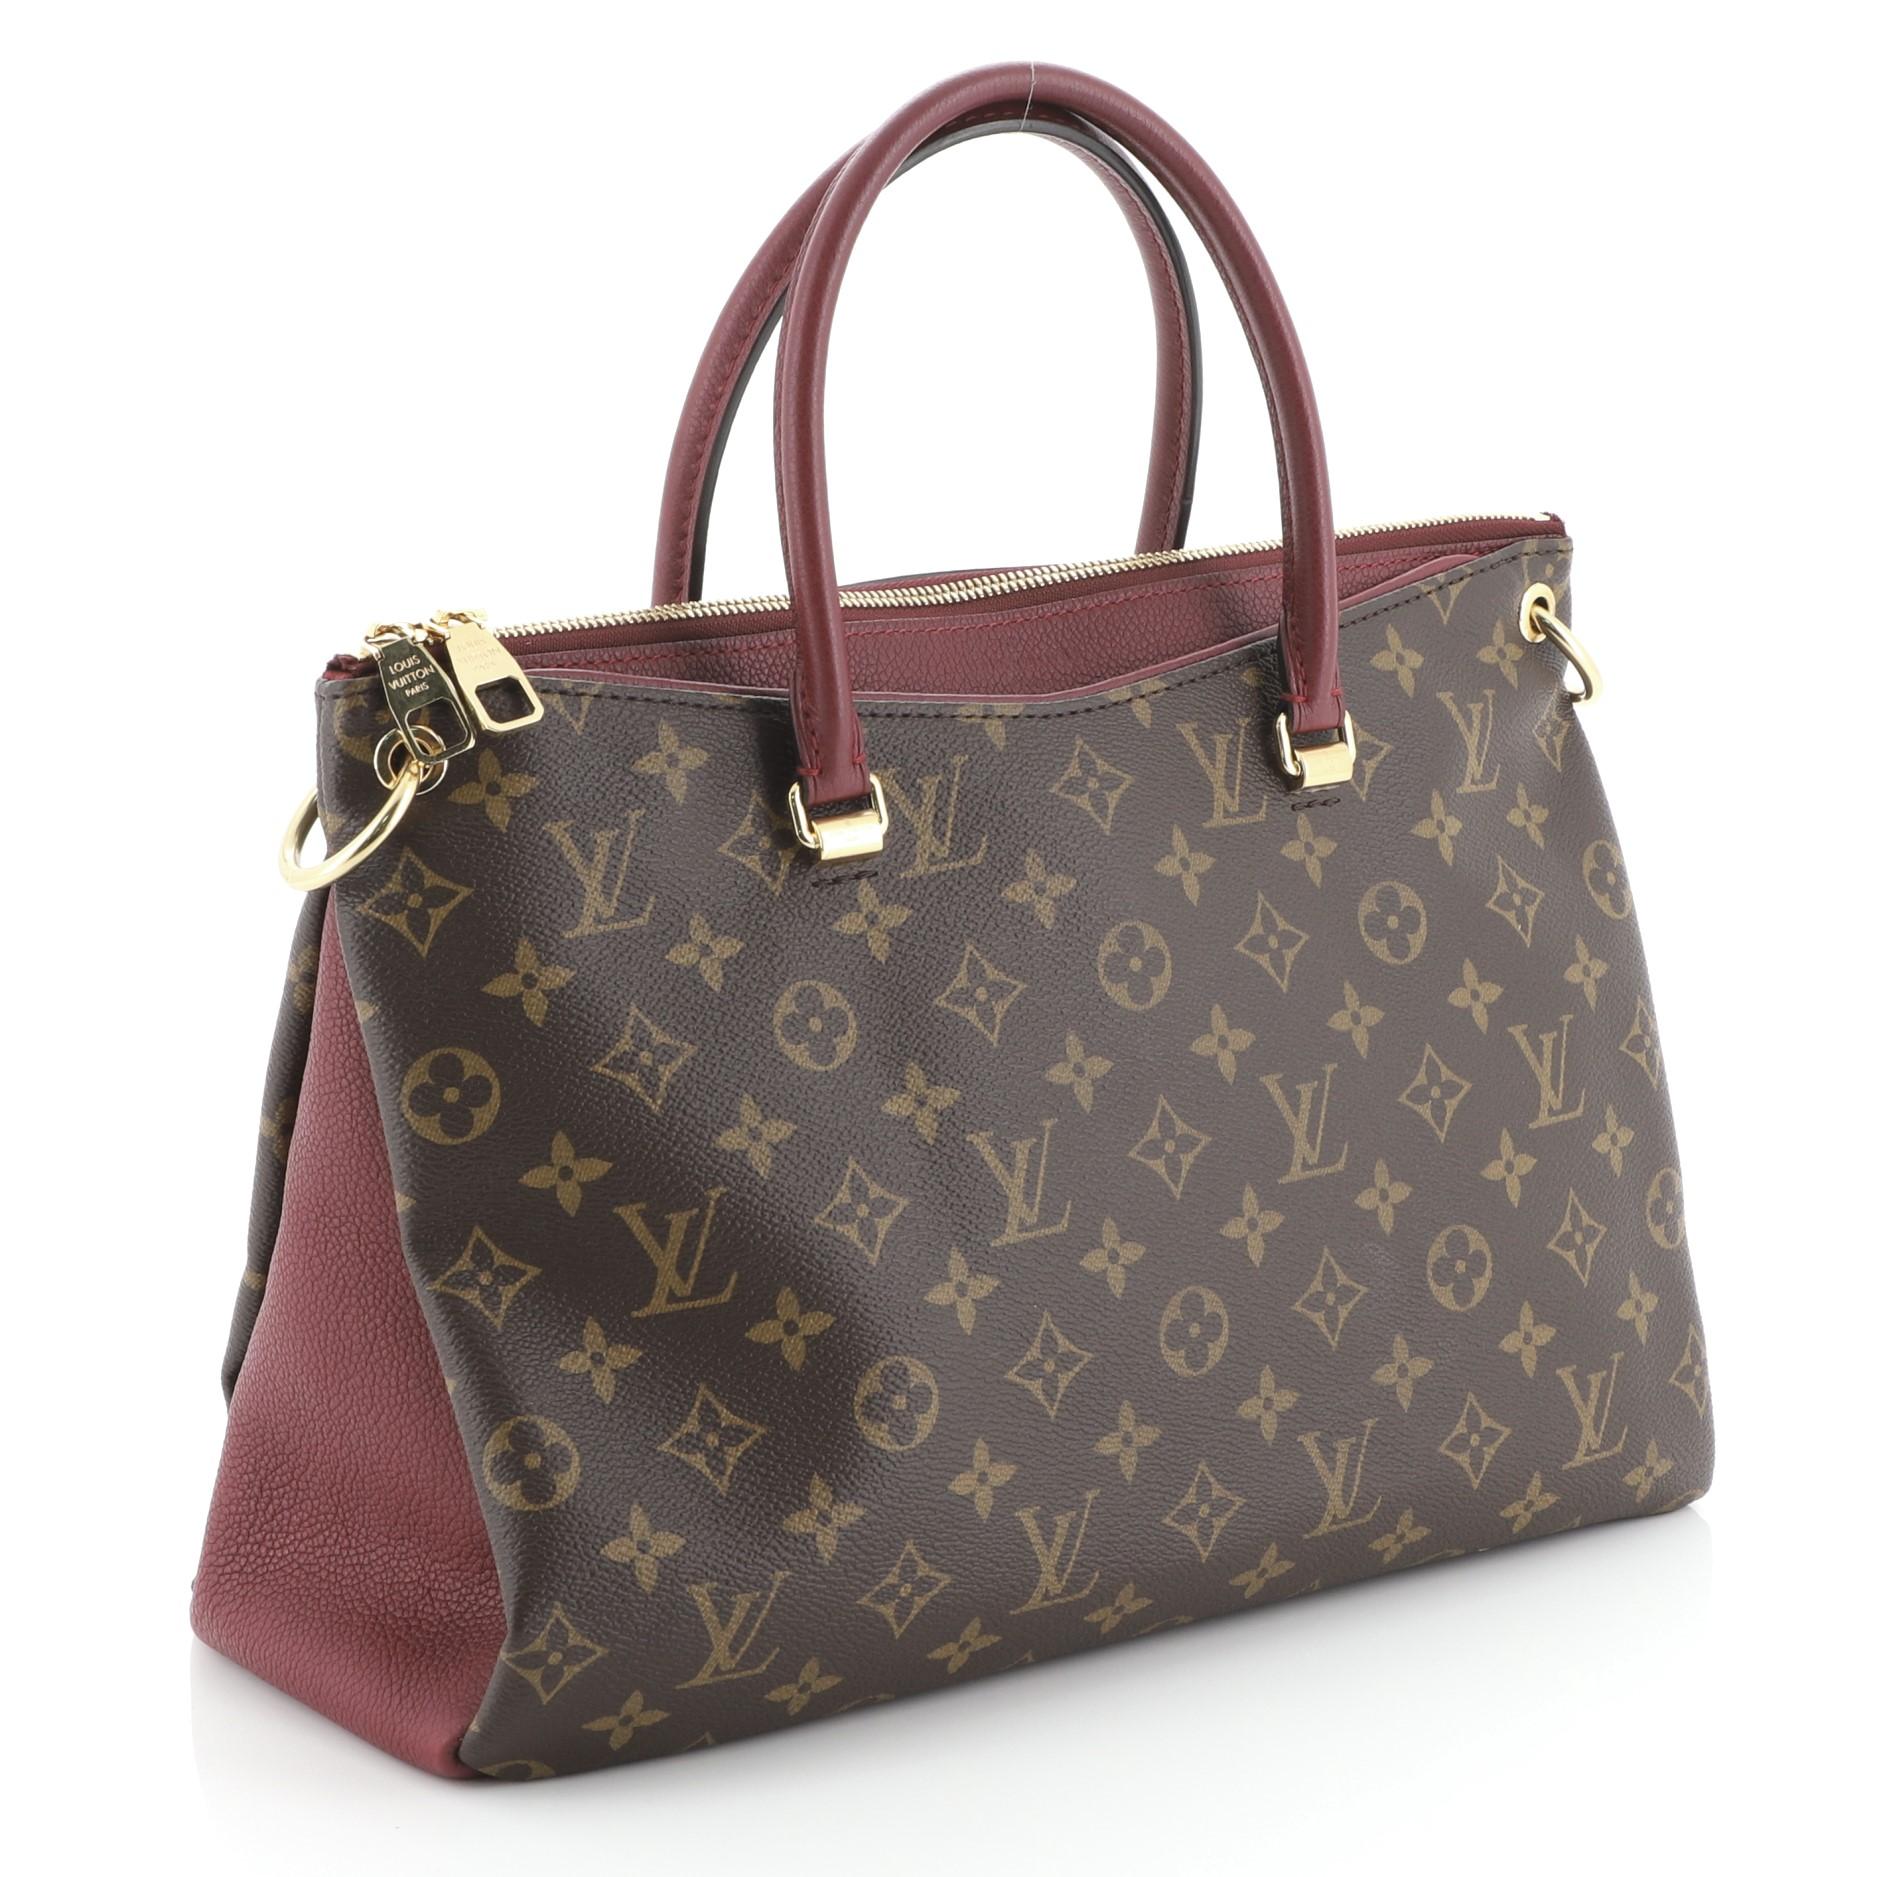 This Louis Vuitton Pallas Tote Monogram Canvas, crafted from brown monogram coated canvas and red leather, features dual rolled handles, protective base studs, and gold-tone hardware. Its two-way zip closure opens to a red microfiber interior with